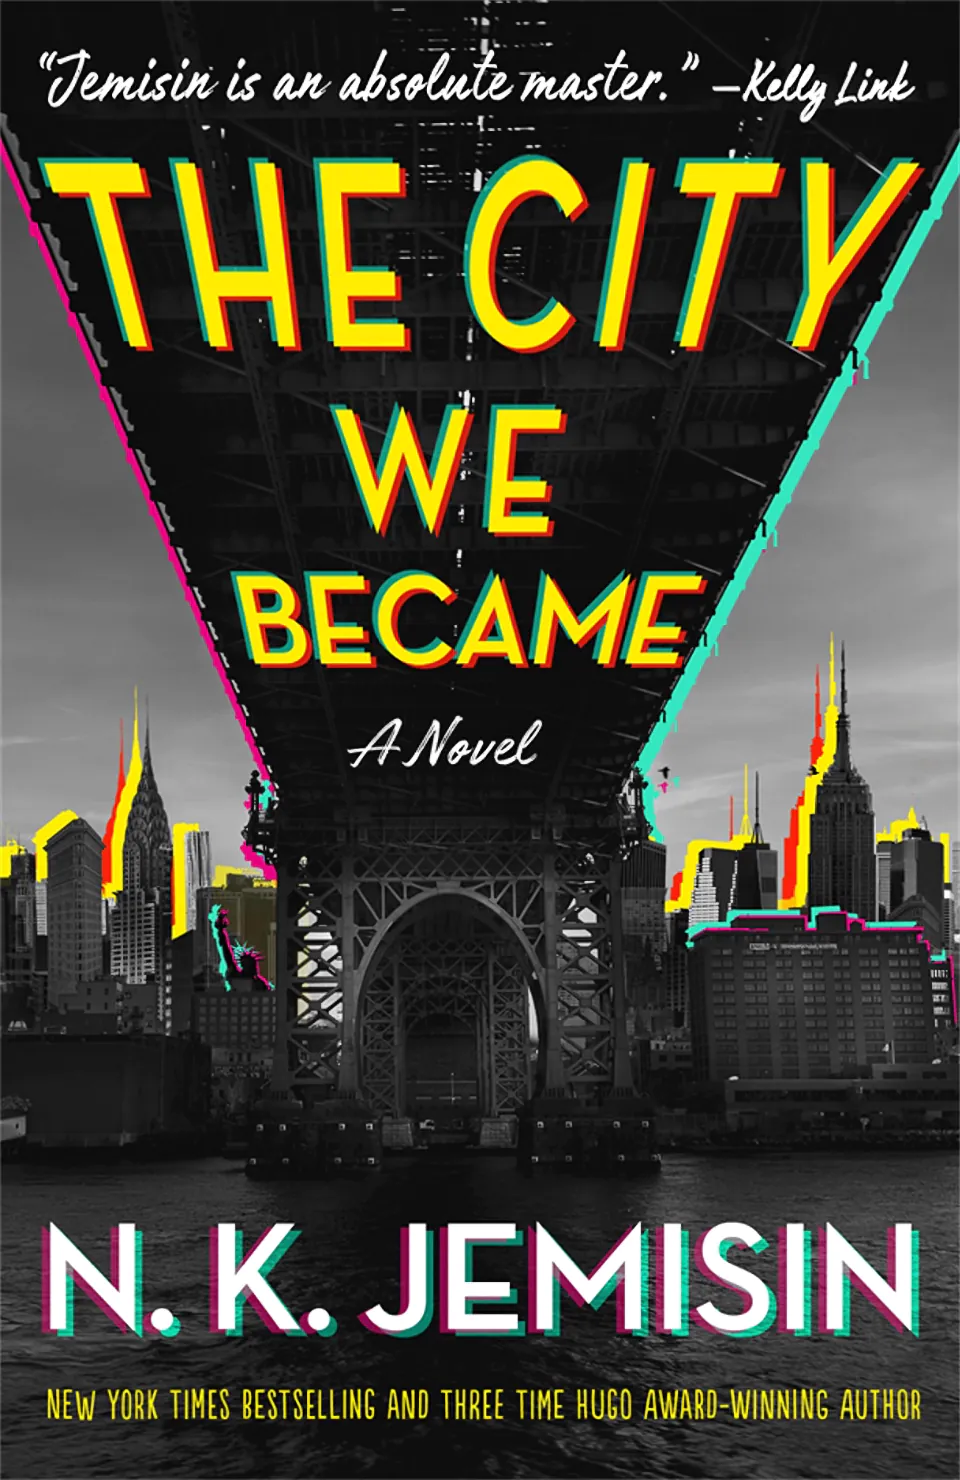 The City We Became by N.K. Jemisin finished on 2023 Jan 15